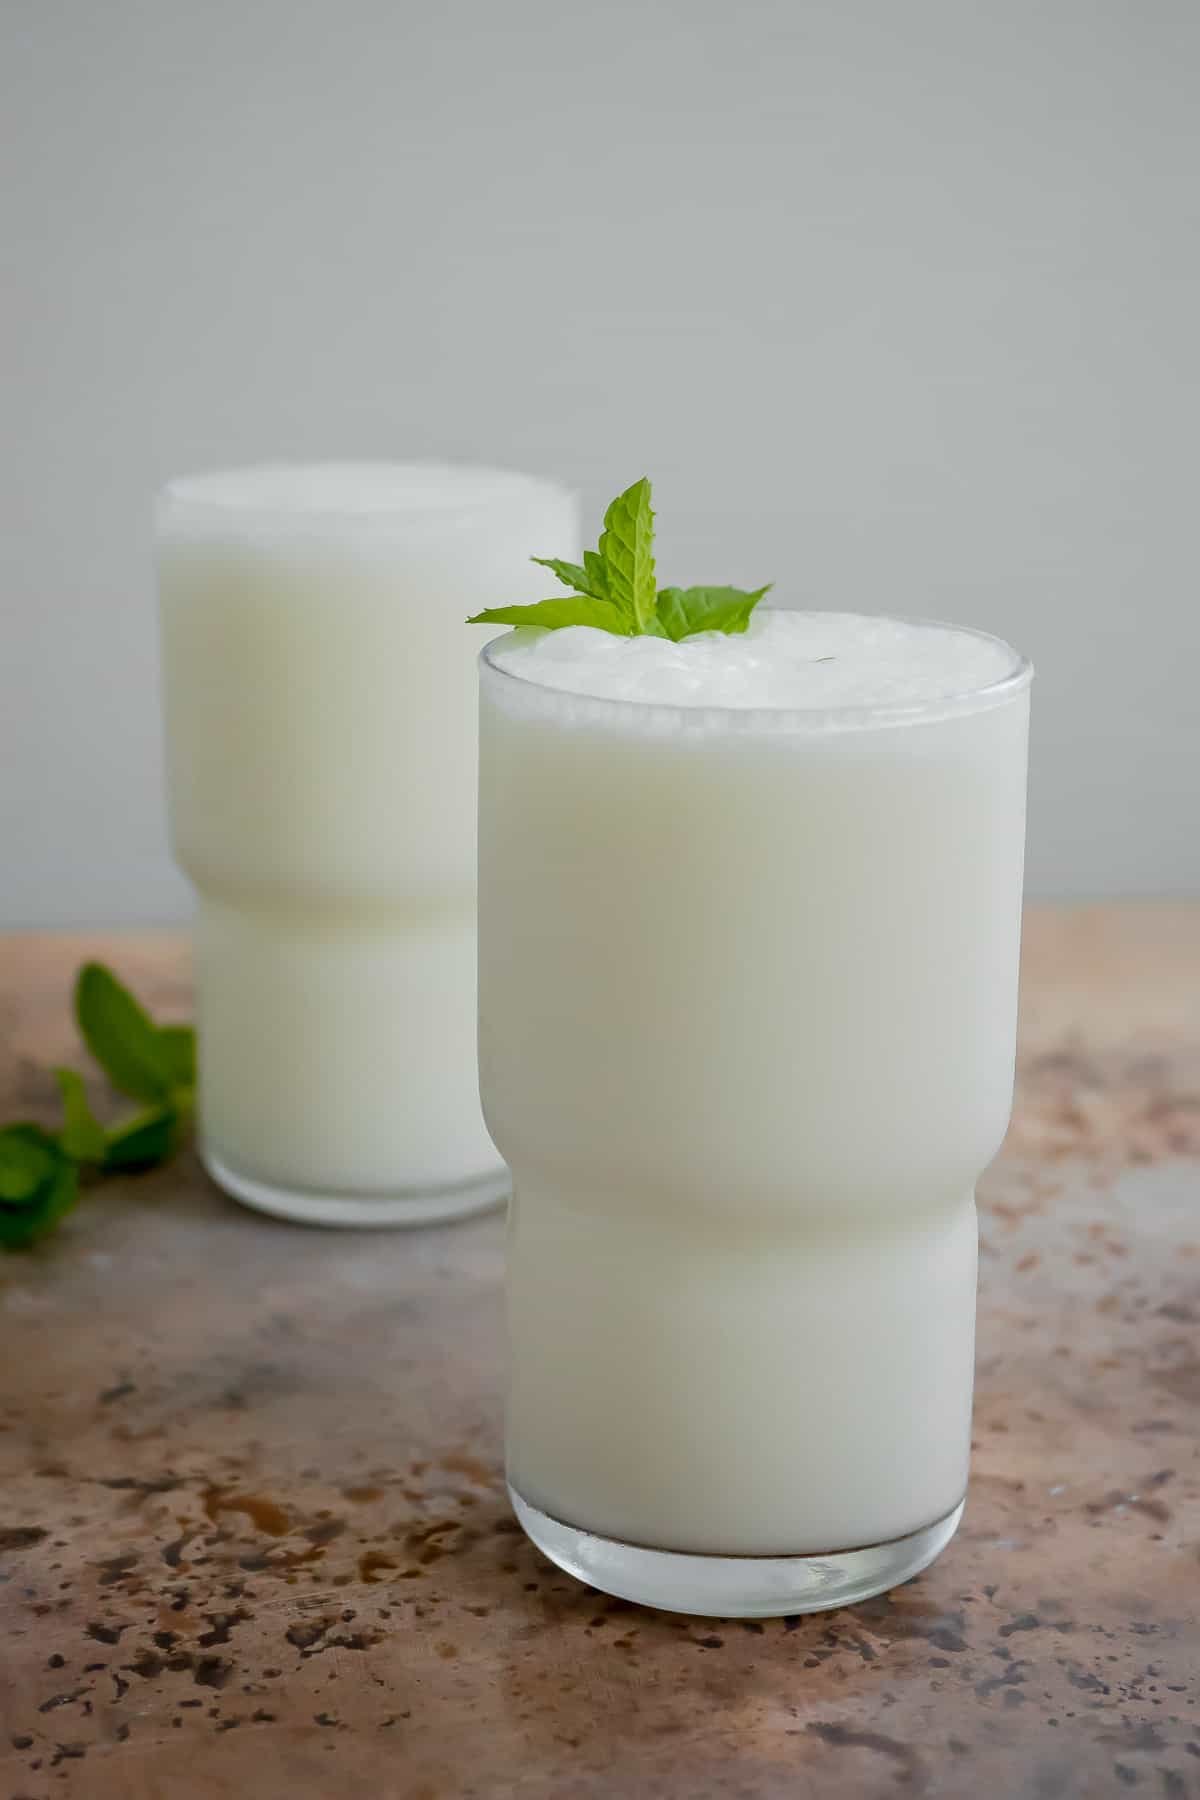 an ayran turkish yogurt drink in a glass garnished with mint leaves, with another glass of ayran in the background.